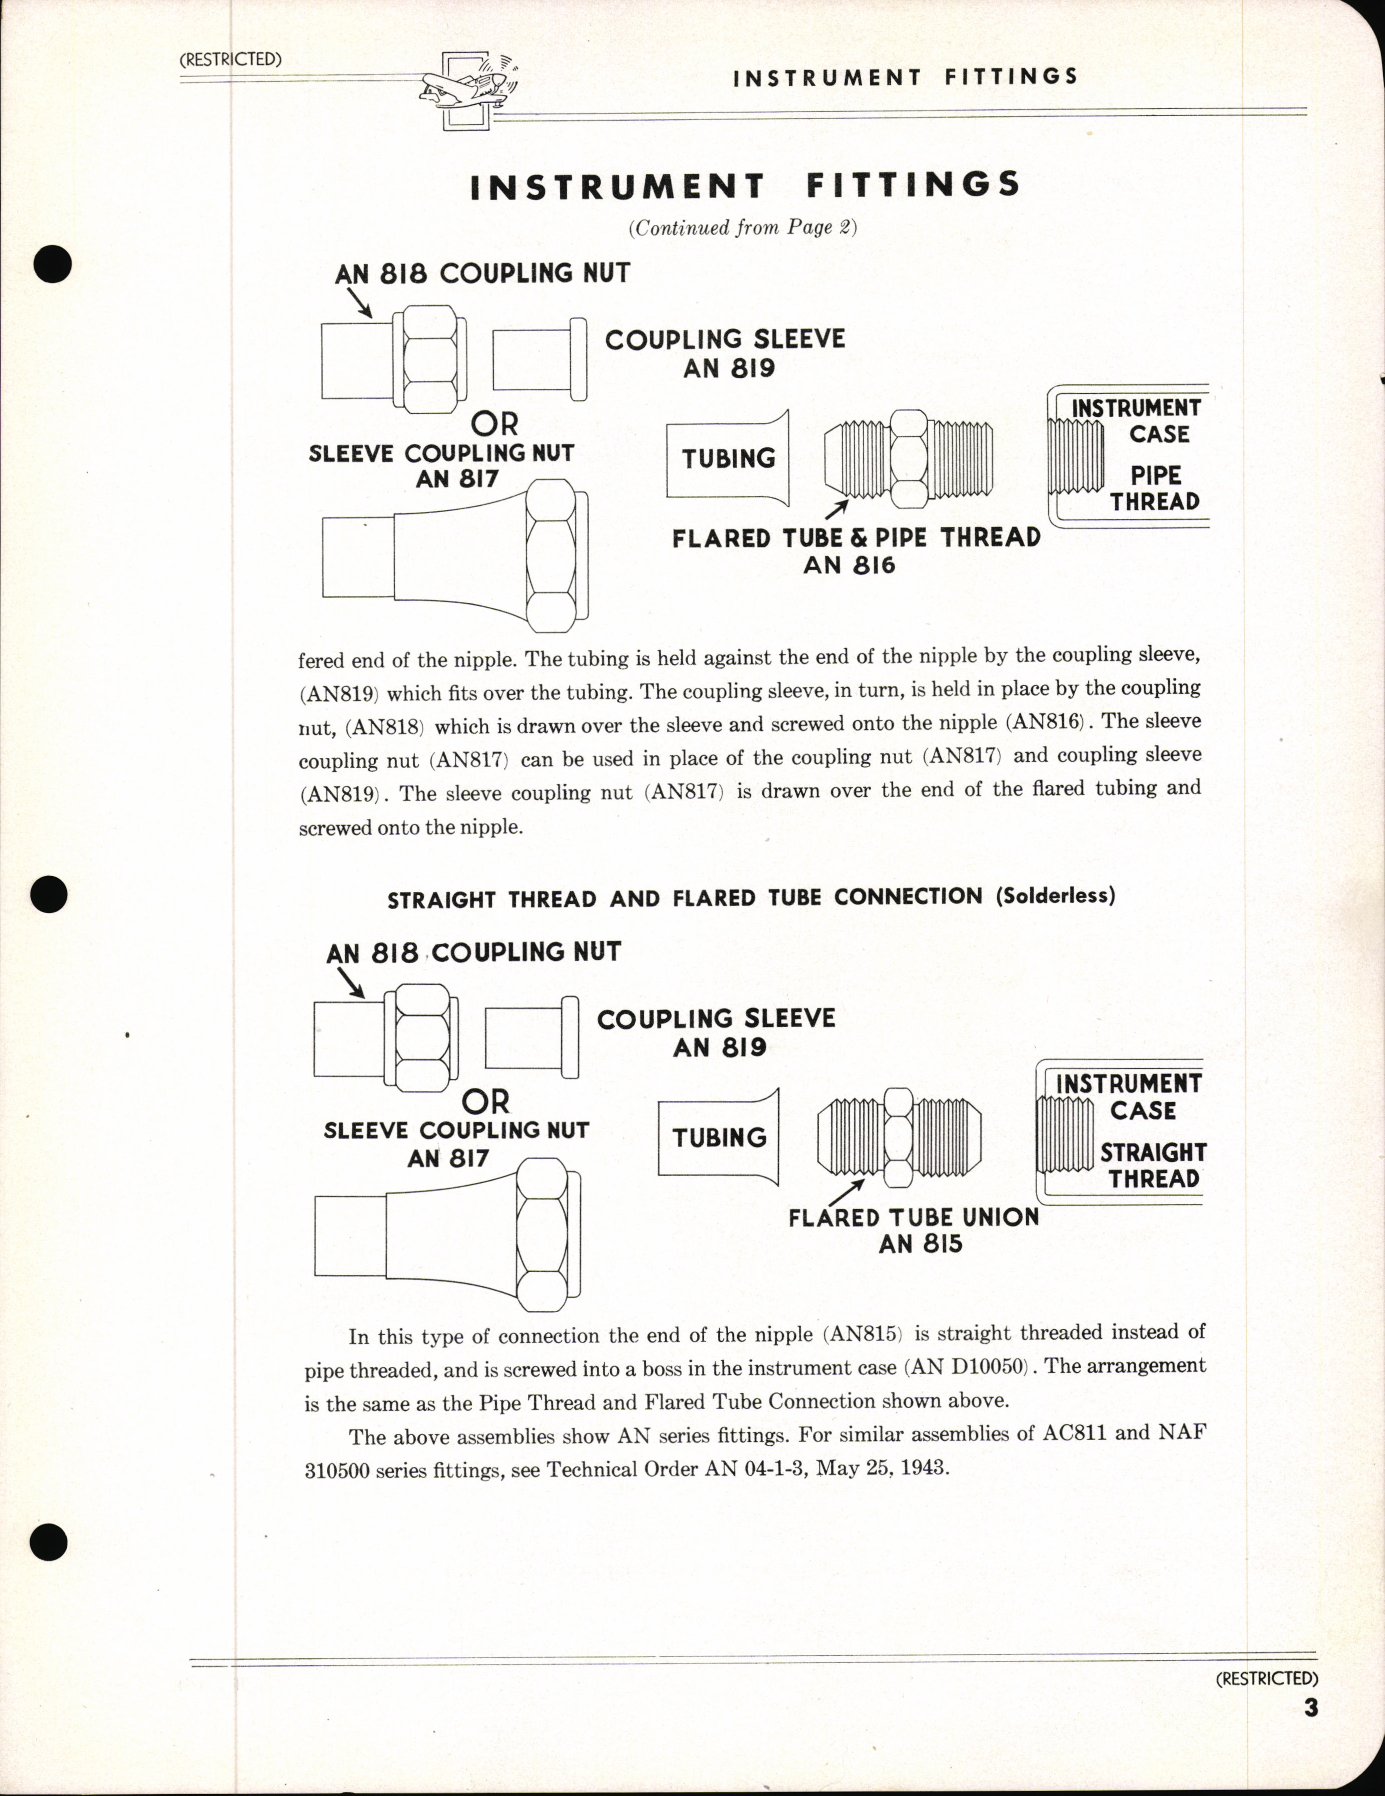 Sample page  98 from AirCorps Library document: Instruments - Index of Aeronautical Equipment - Volume 6